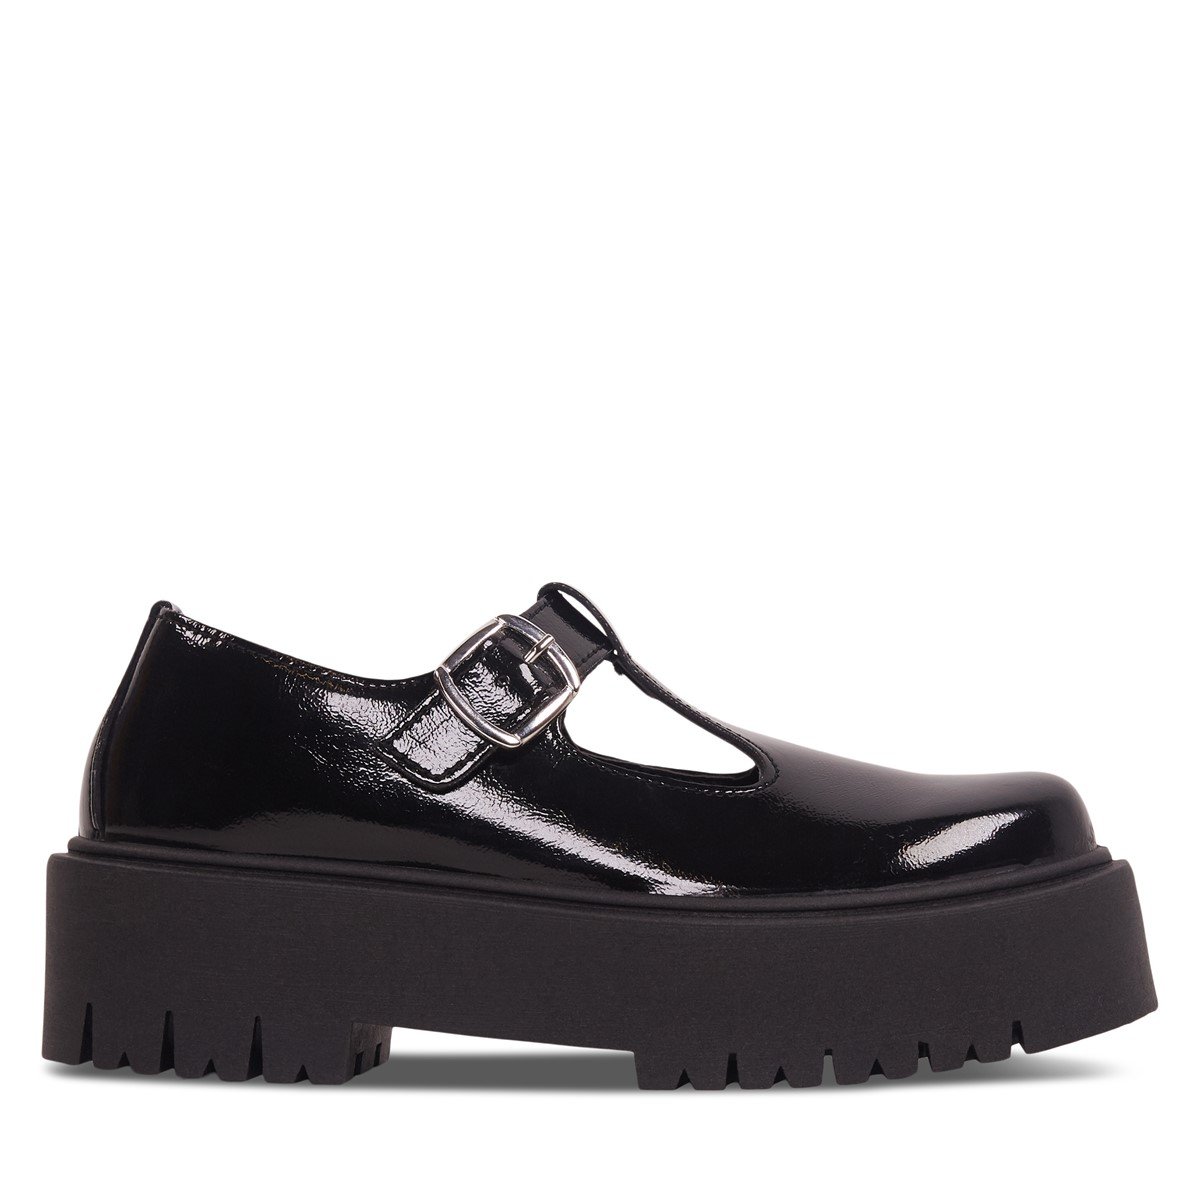 Women's Mary-Jane Platform Shoes in Patent Black